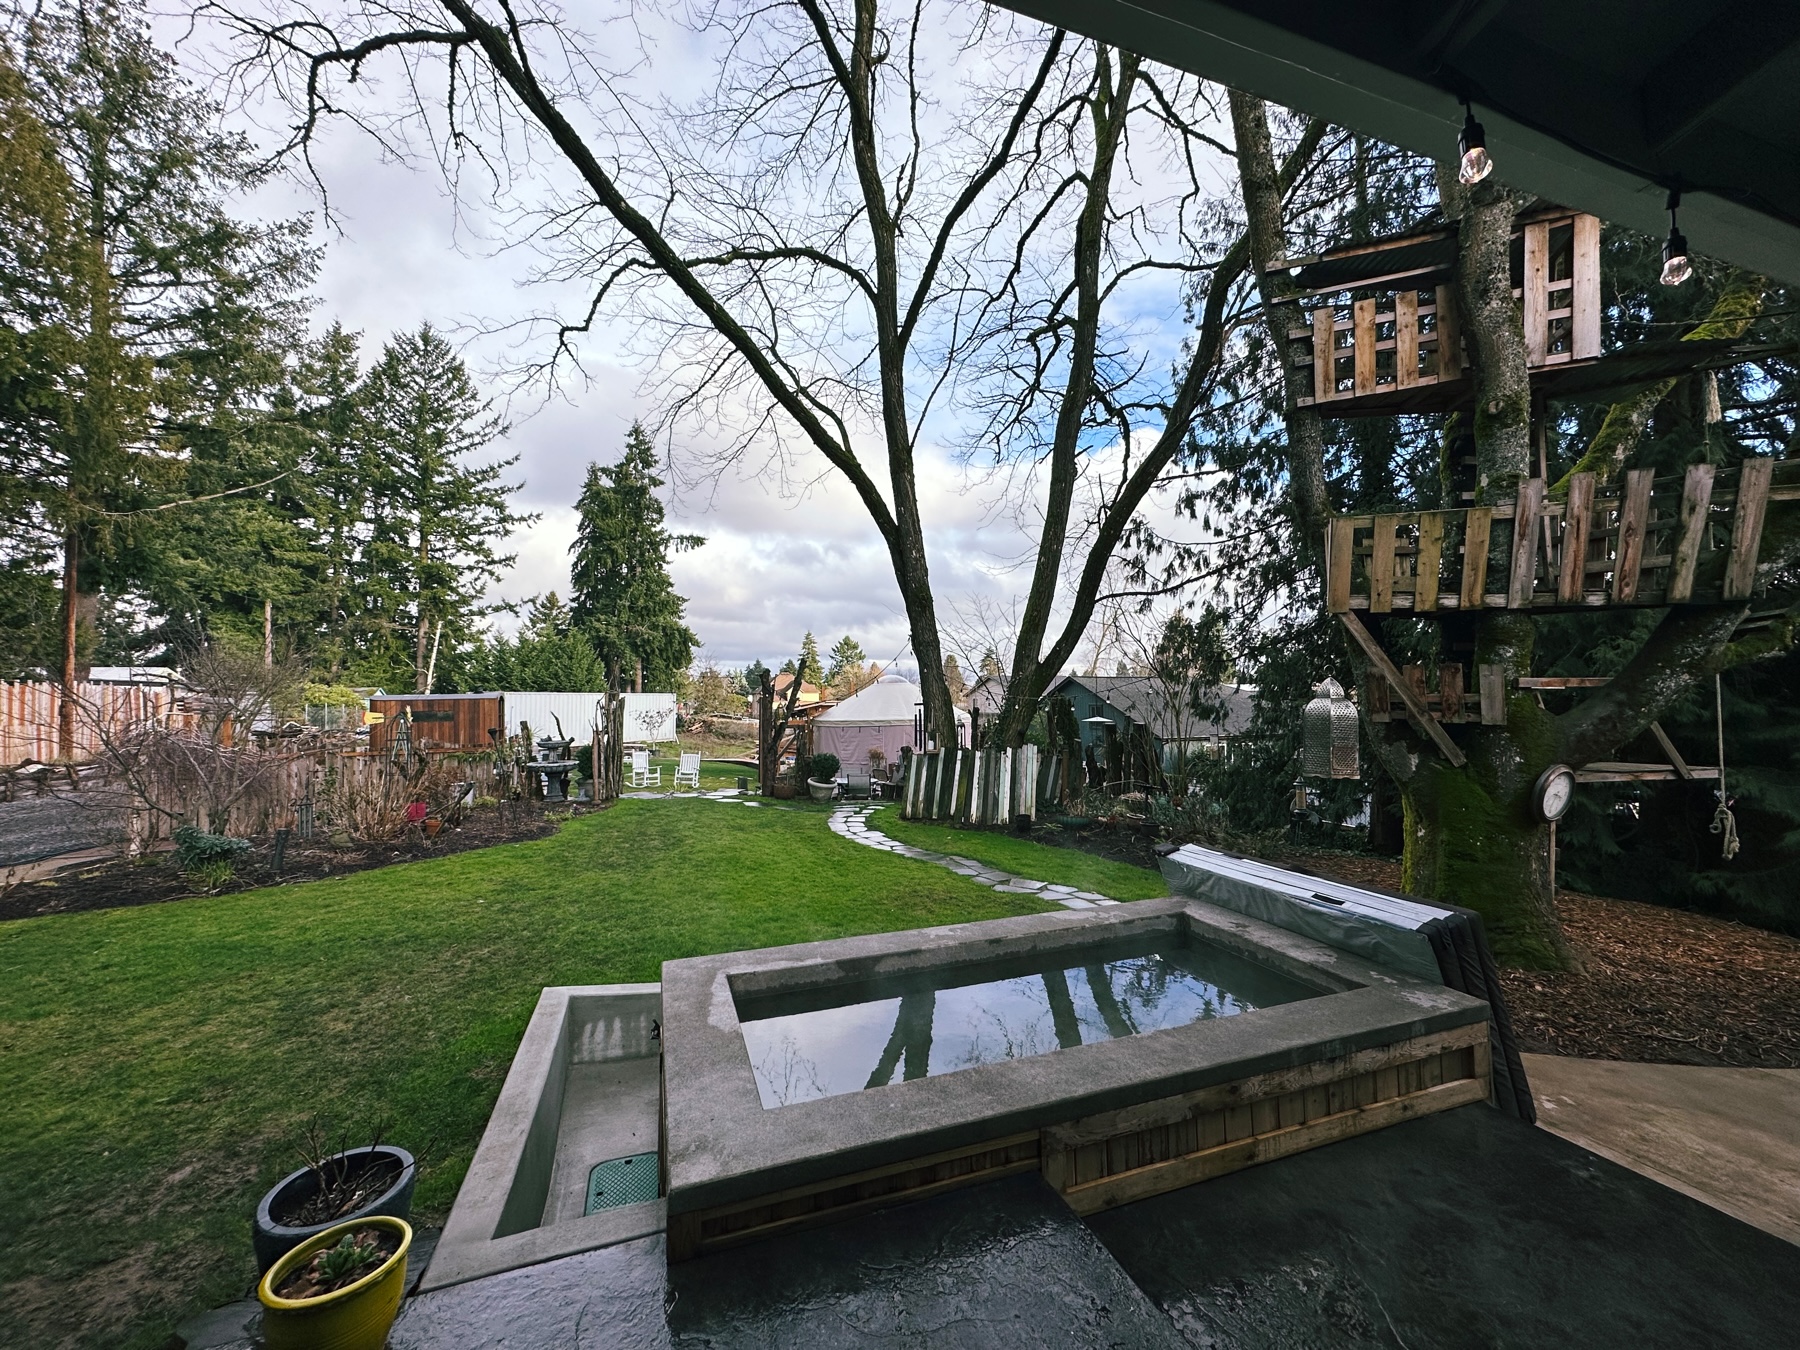 An outdoor space with a hot tub, lawn, tree house, trees and a cloudy sky with some blue patches.